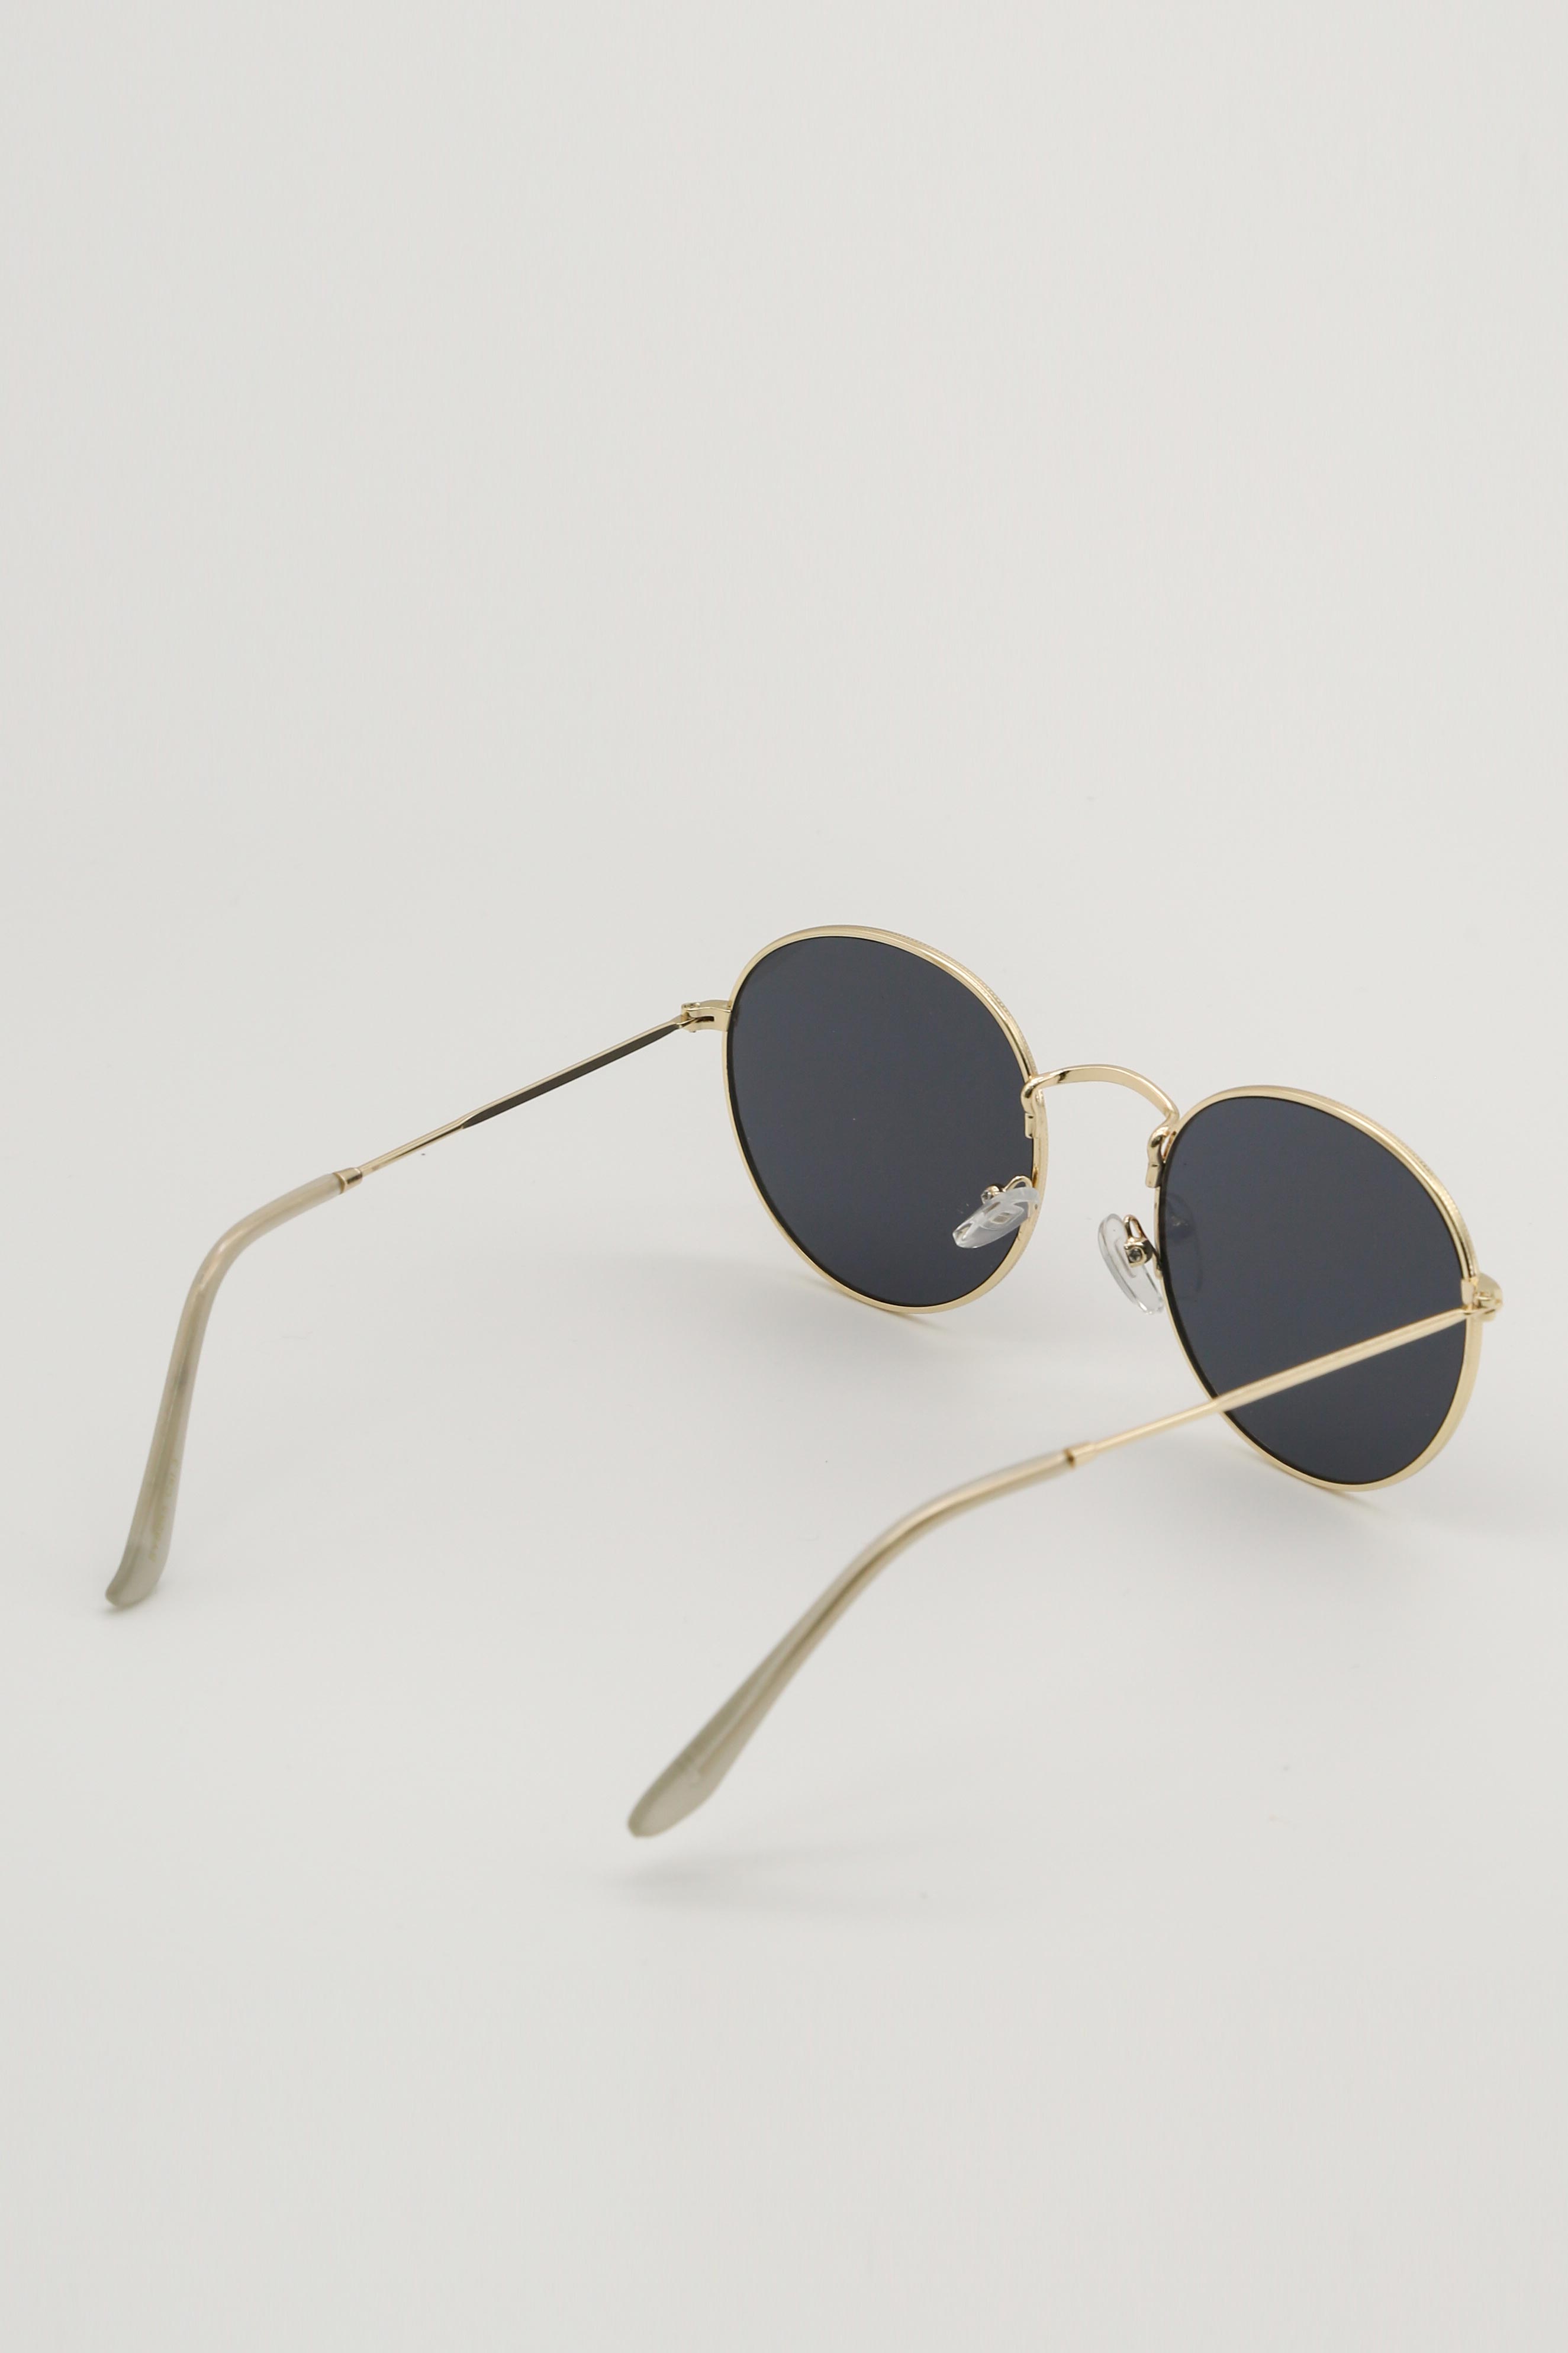 Tinted Gold Frame Round Sunglasses Dressed In Lucy